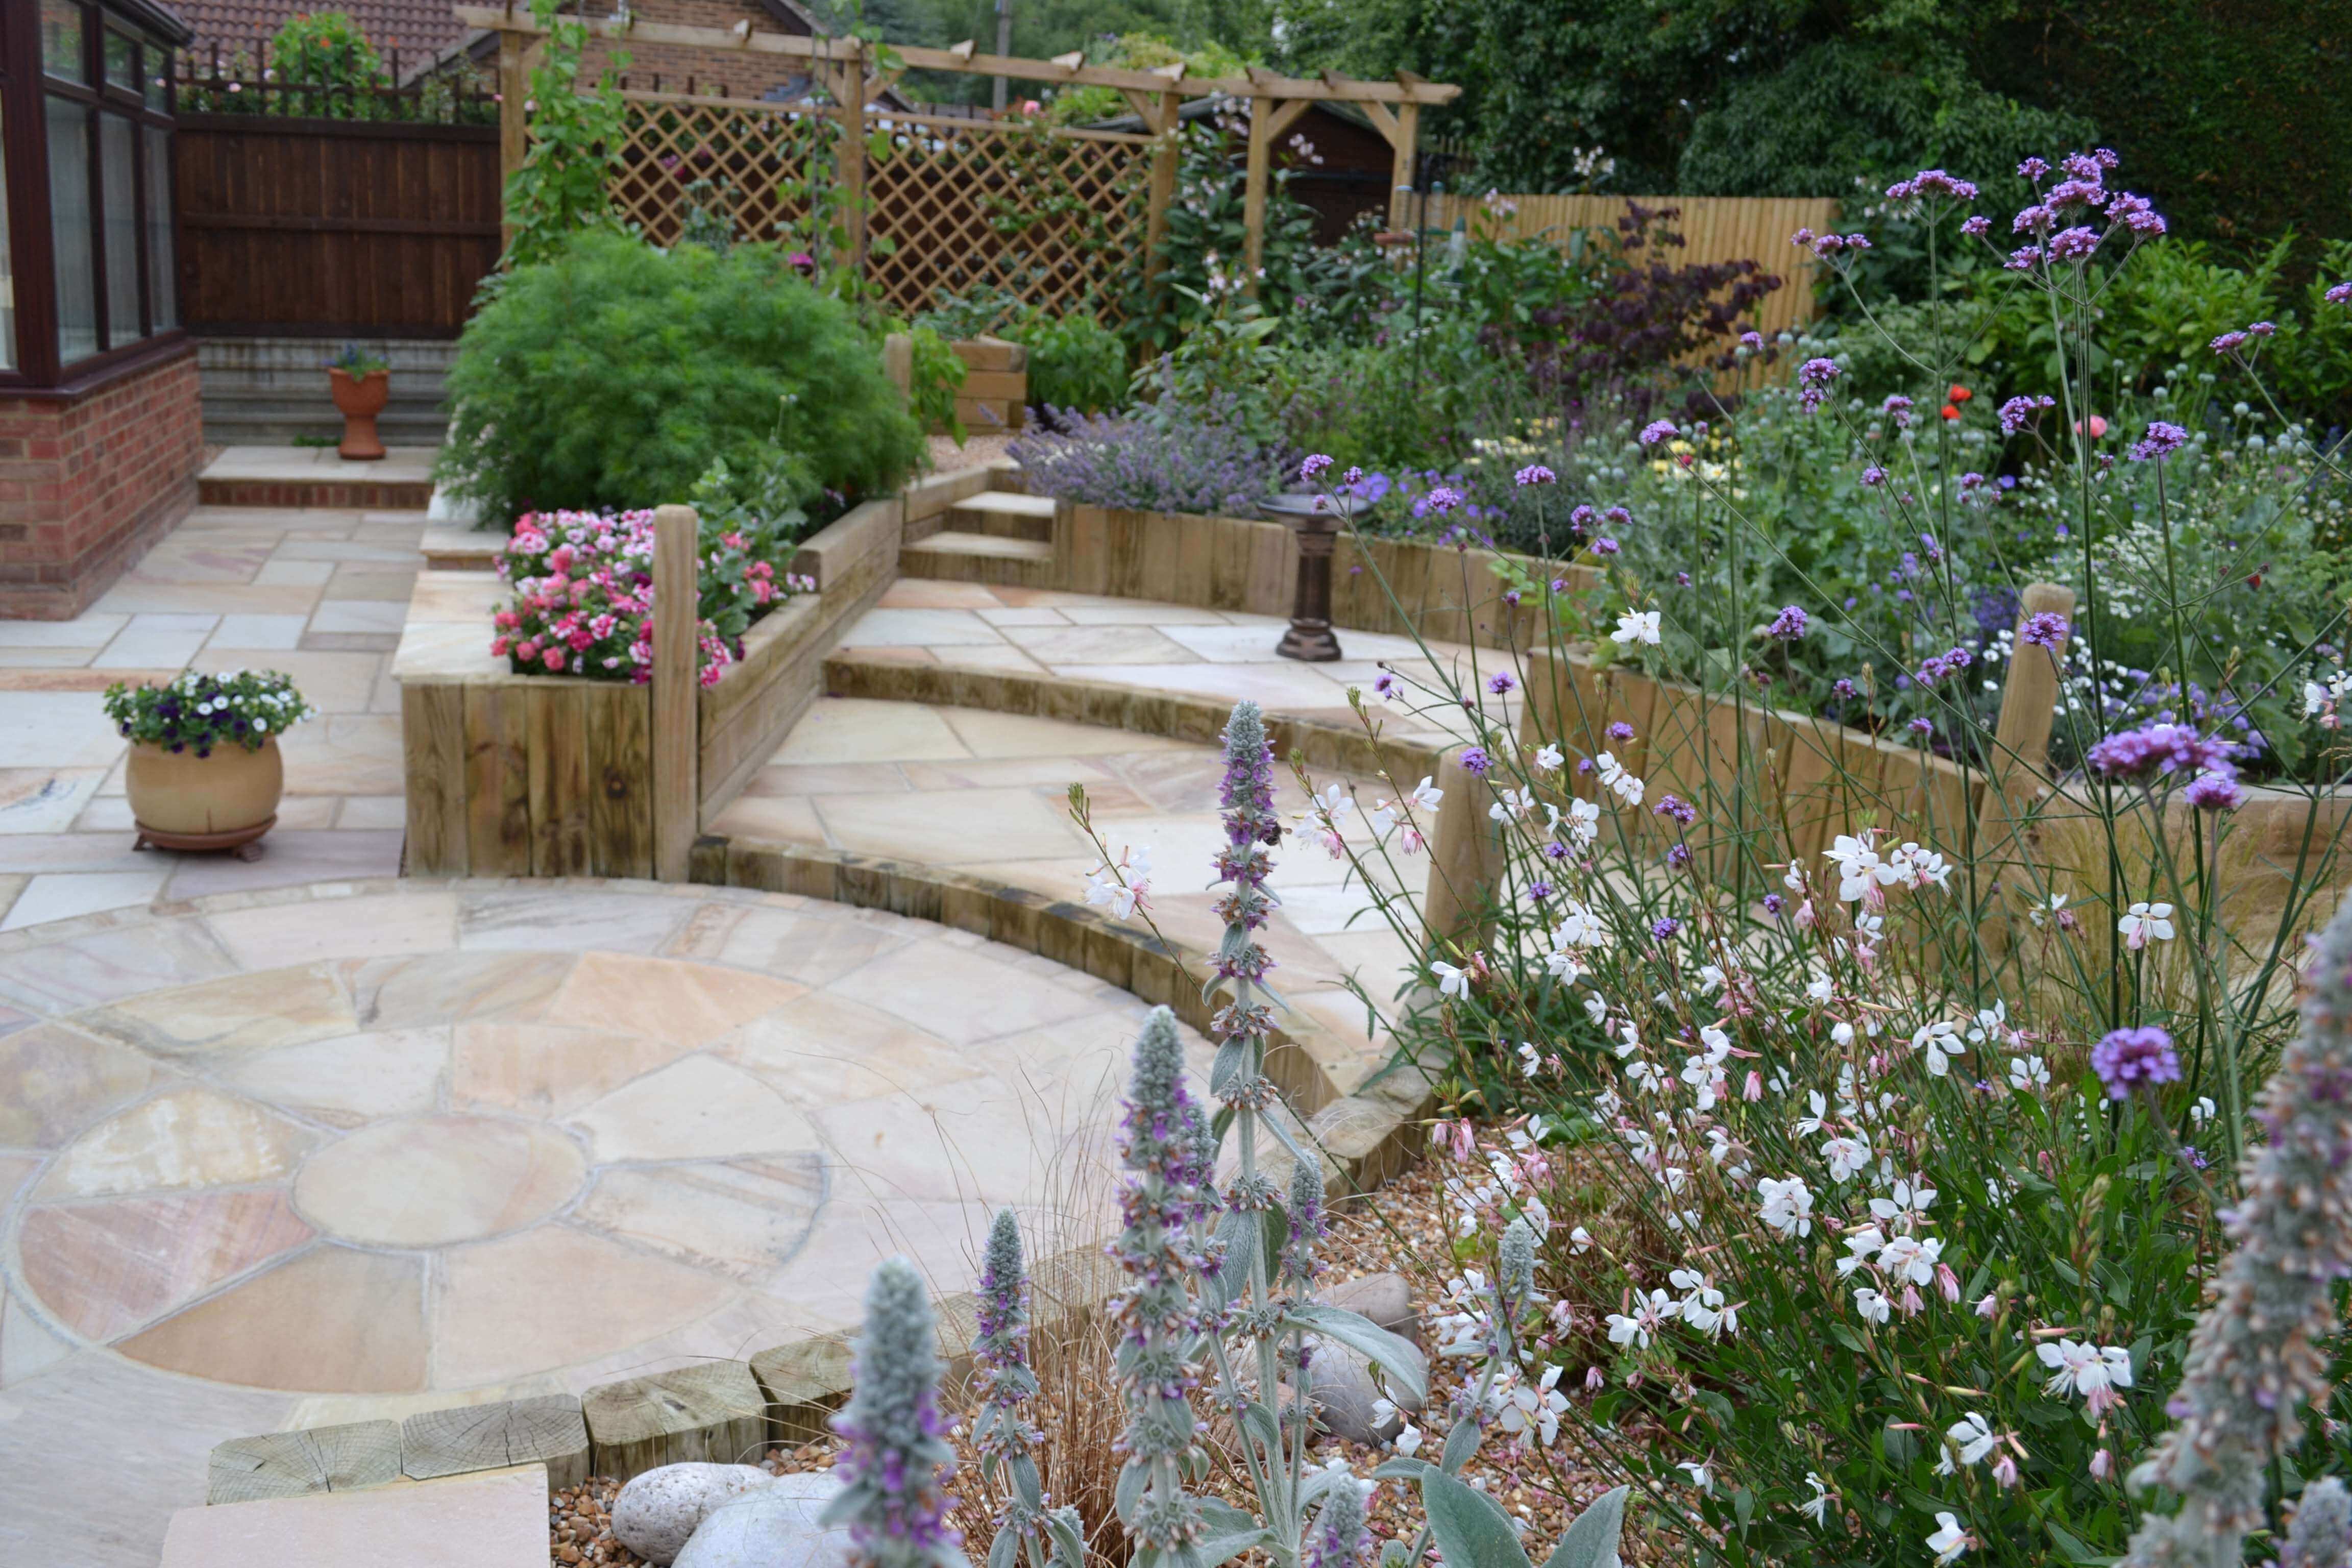 Circular paving surrounded by raised beds